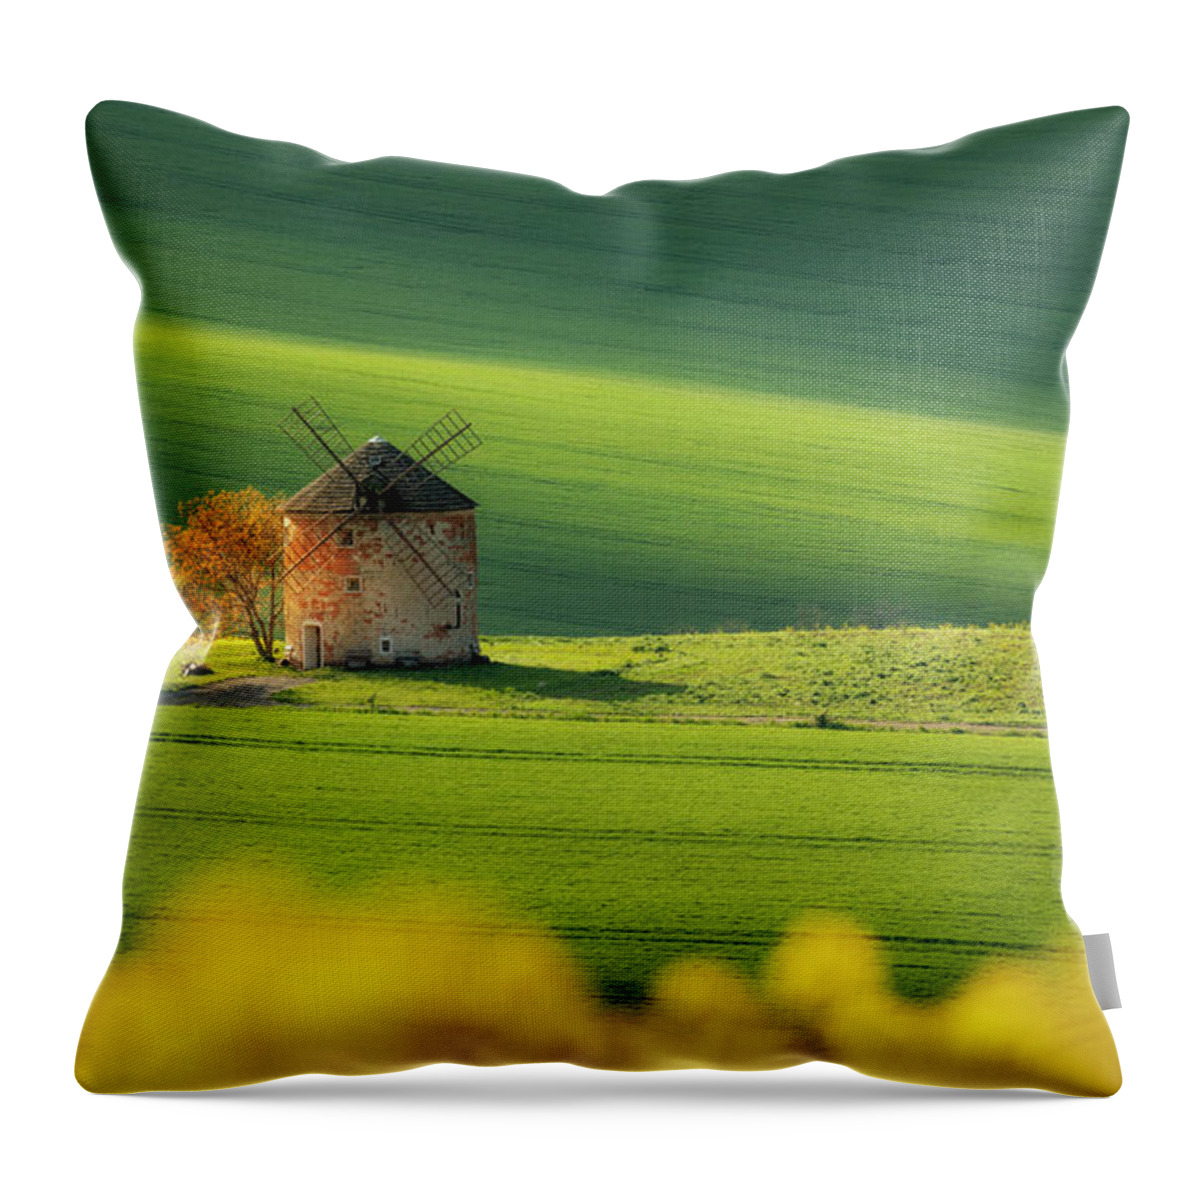 Windmill Throw Pillow featuring the photograph Moravian windmill II by Piotr Skrzypiec